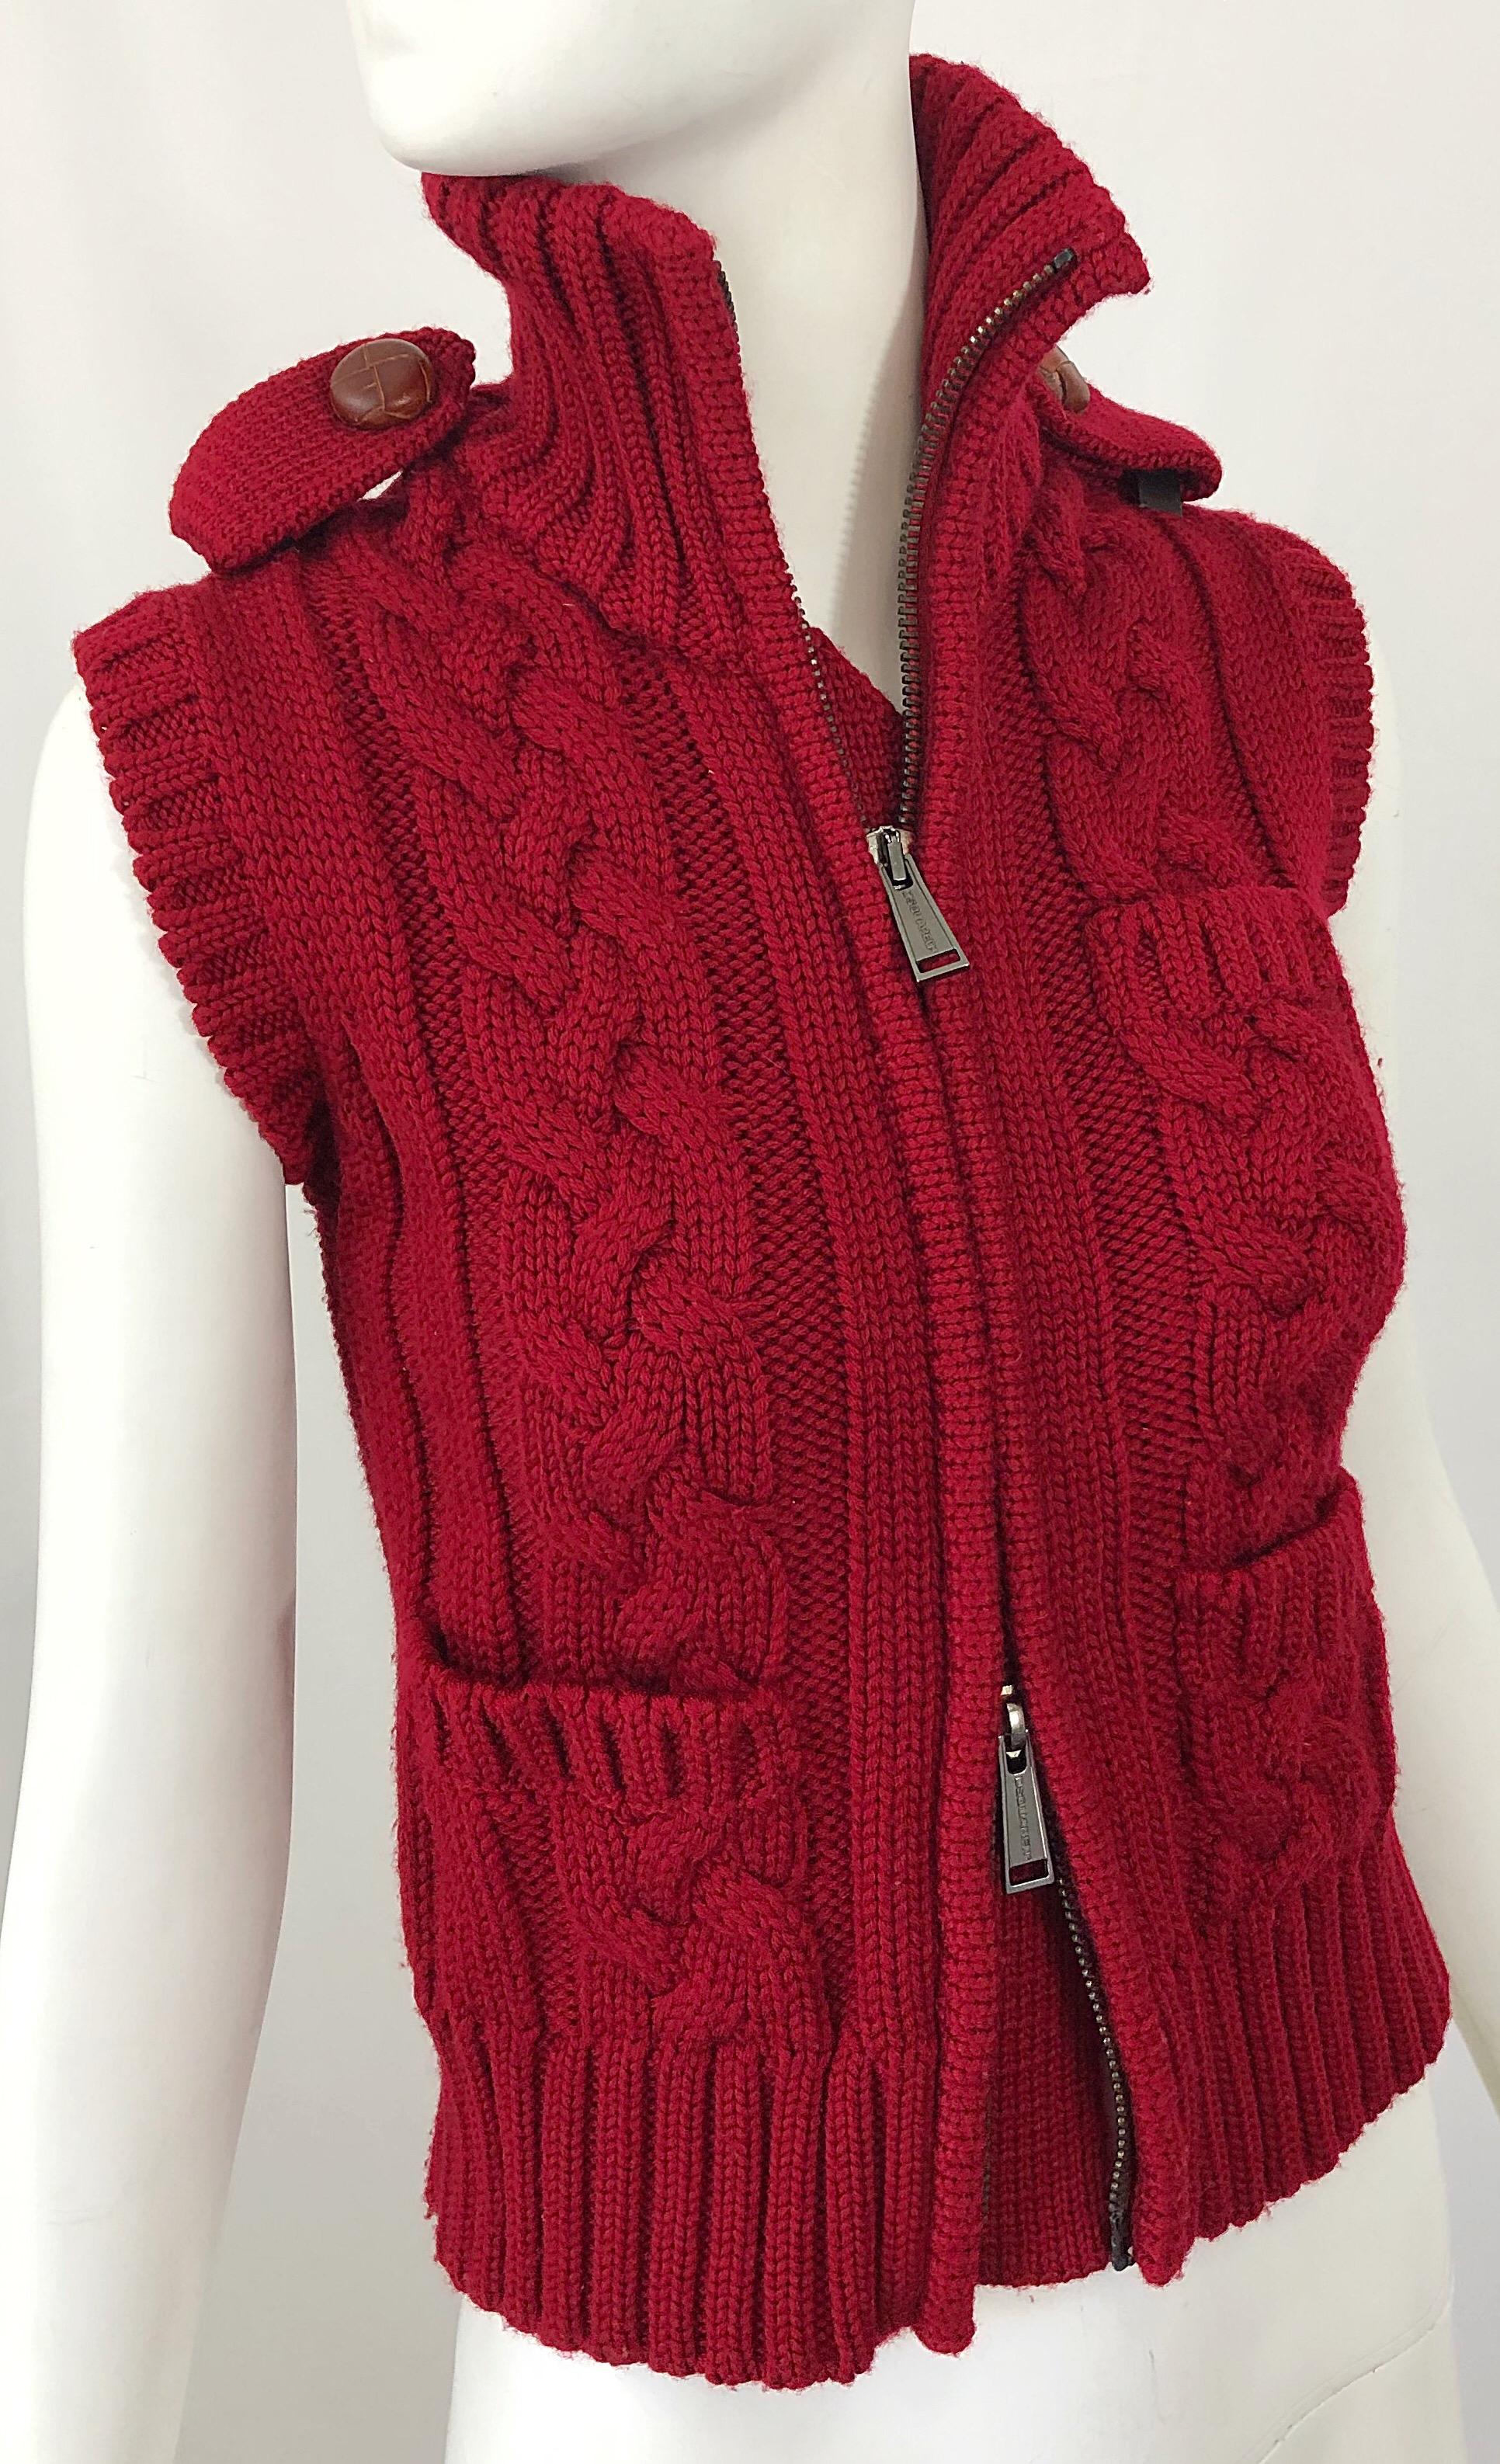 DSquared2 Early 2000s Lipstick Red Wool Sleeveless Cardigan Sweater Vest Top In Excellent Condition For Sale In San Diego, CA